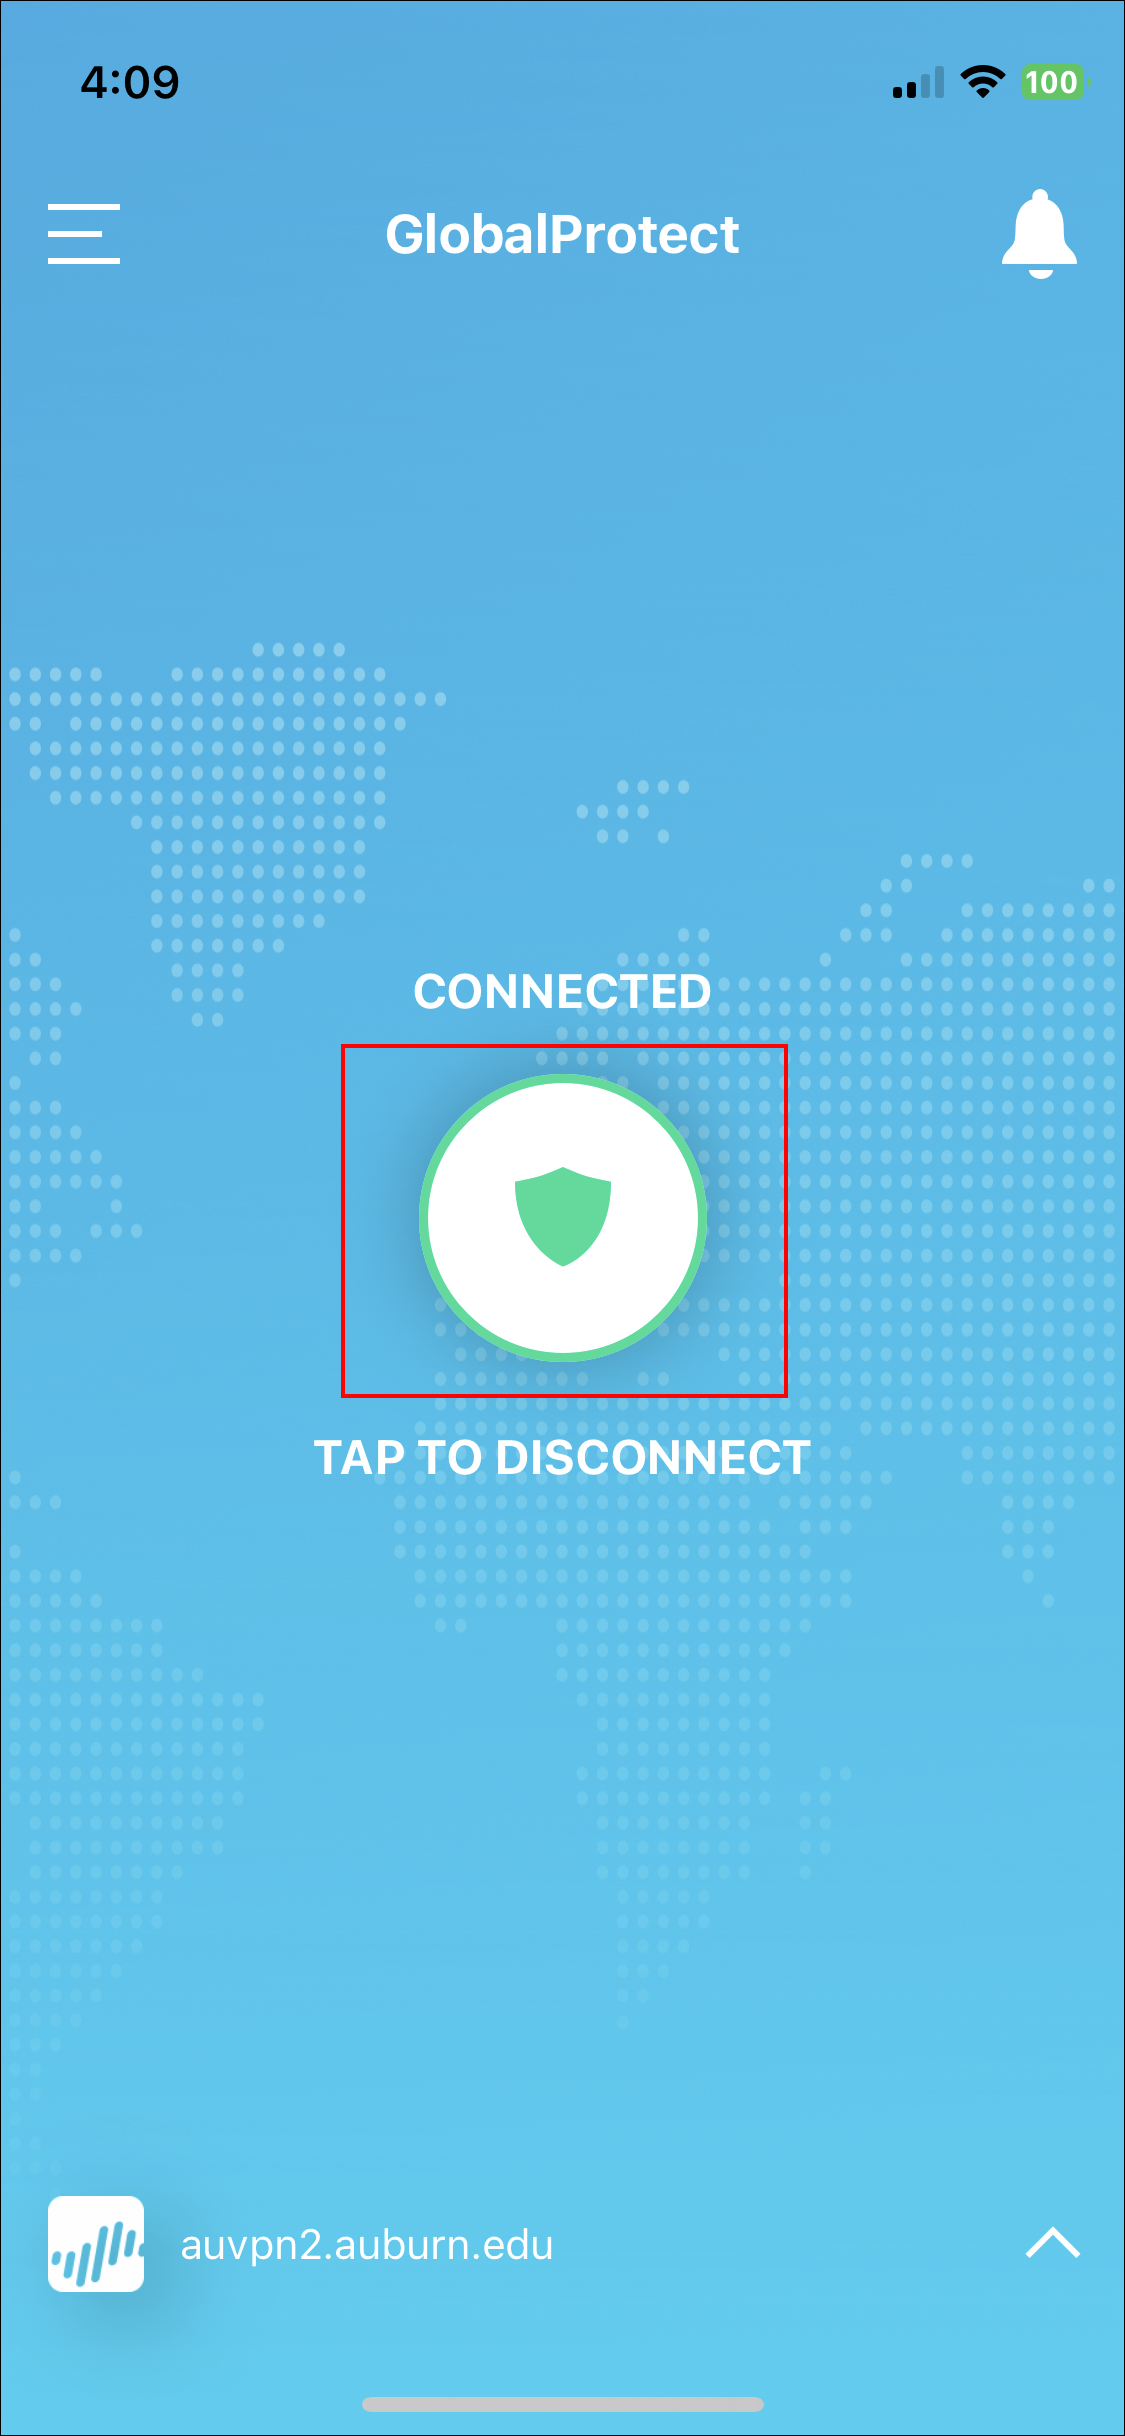 ios global protect vpn connection screen